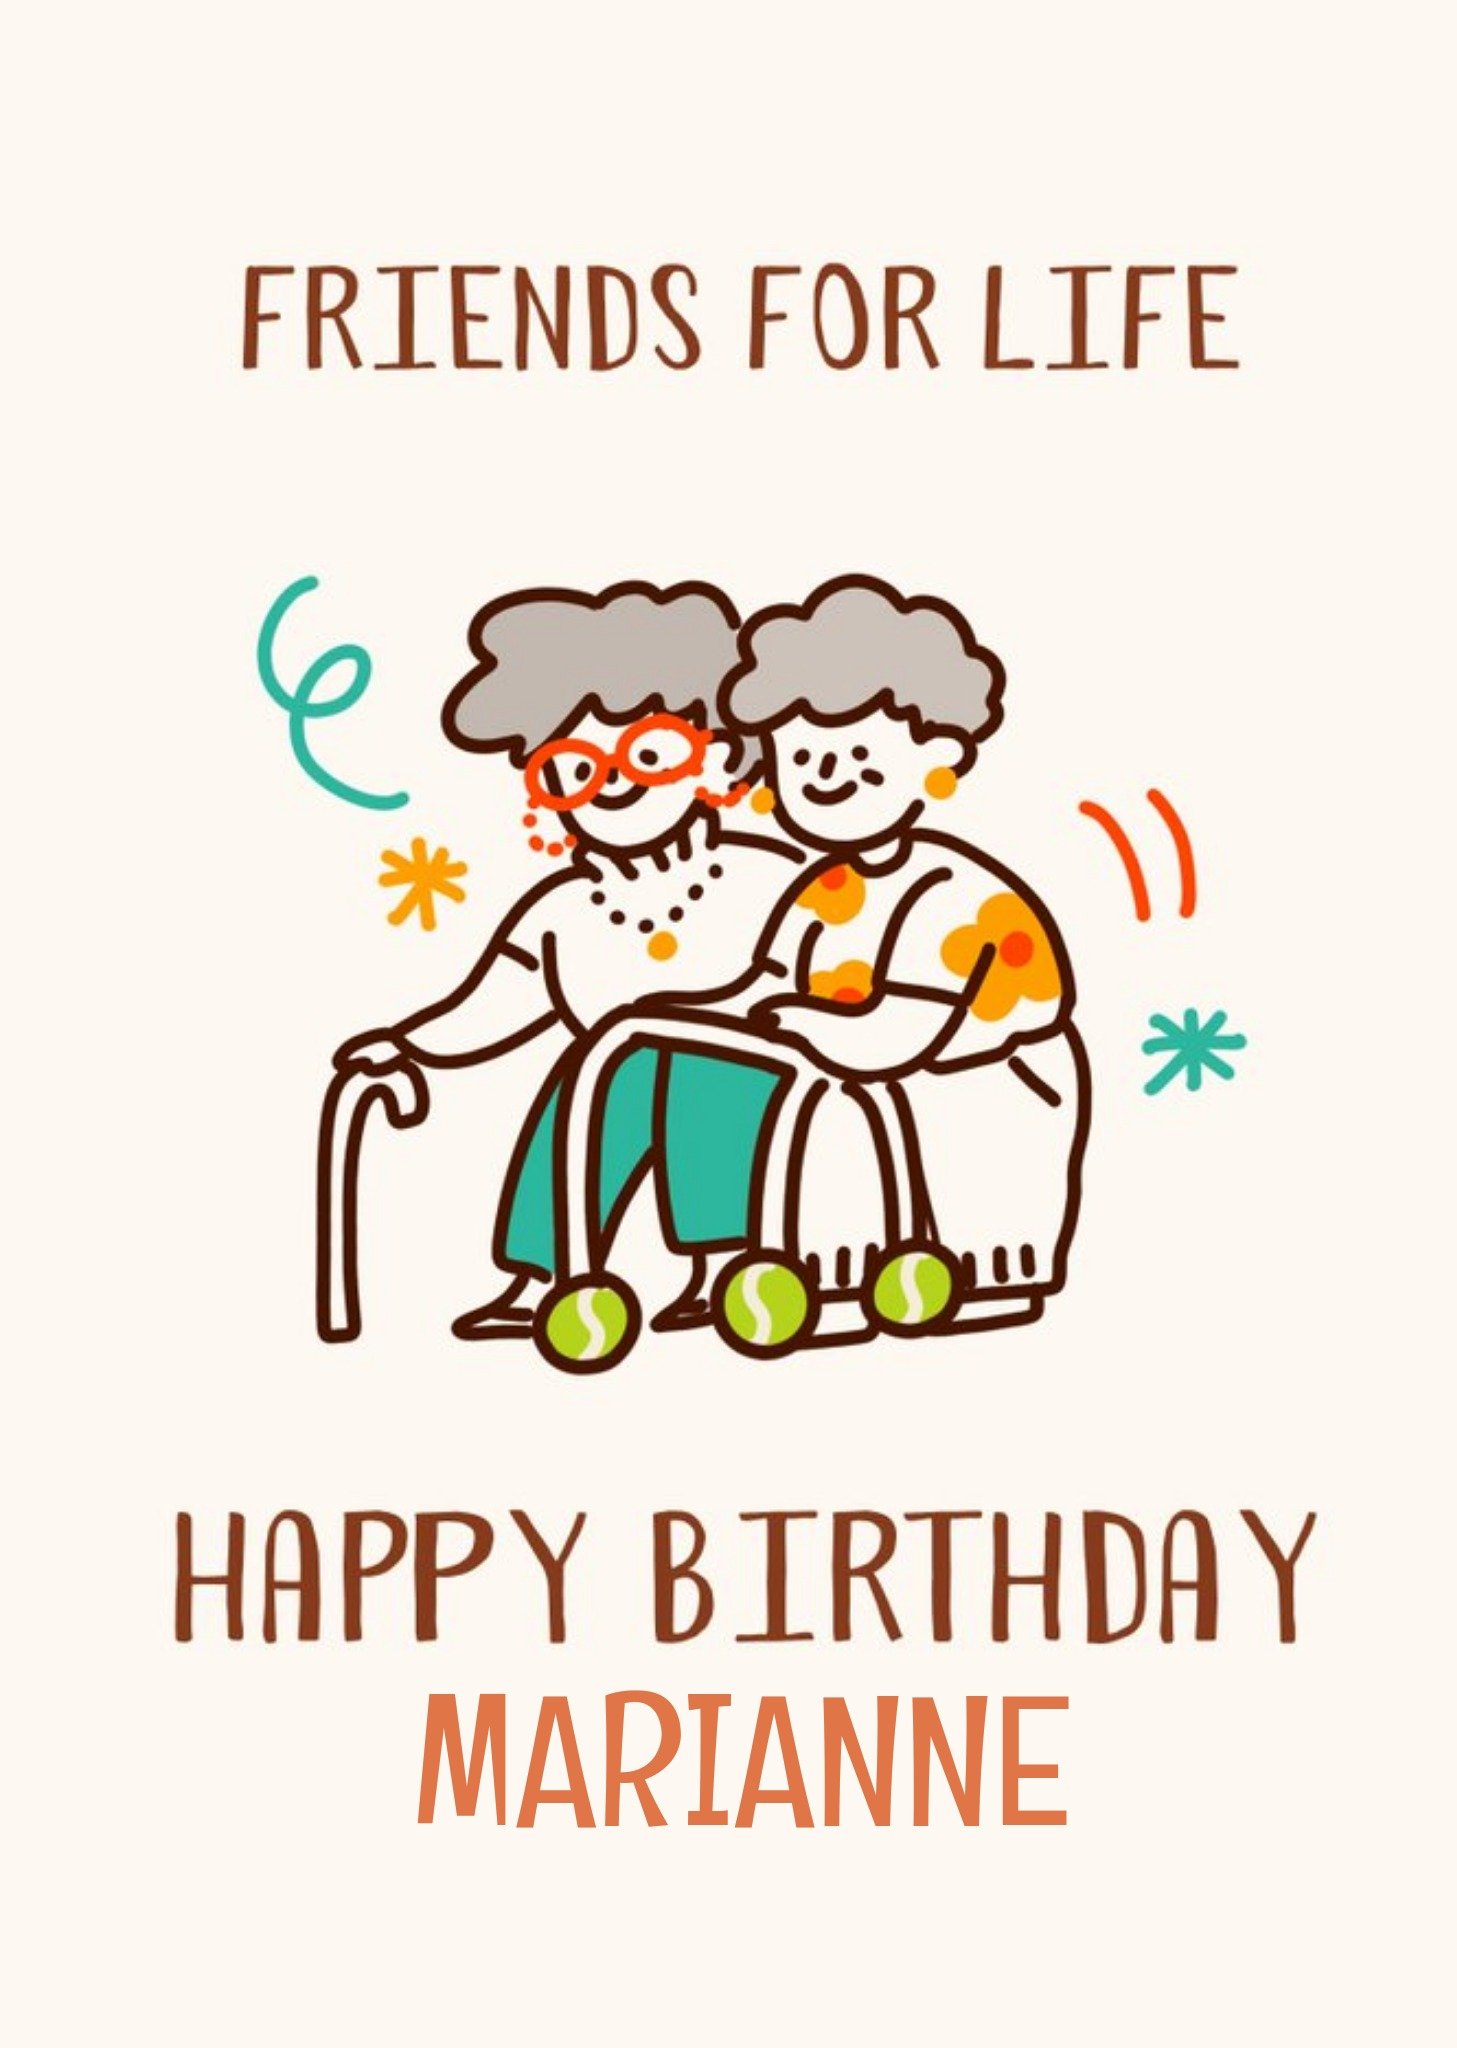 Moonpig Illustrated Elderly Characters Friends For Life Customisable Birthday Card Ecard